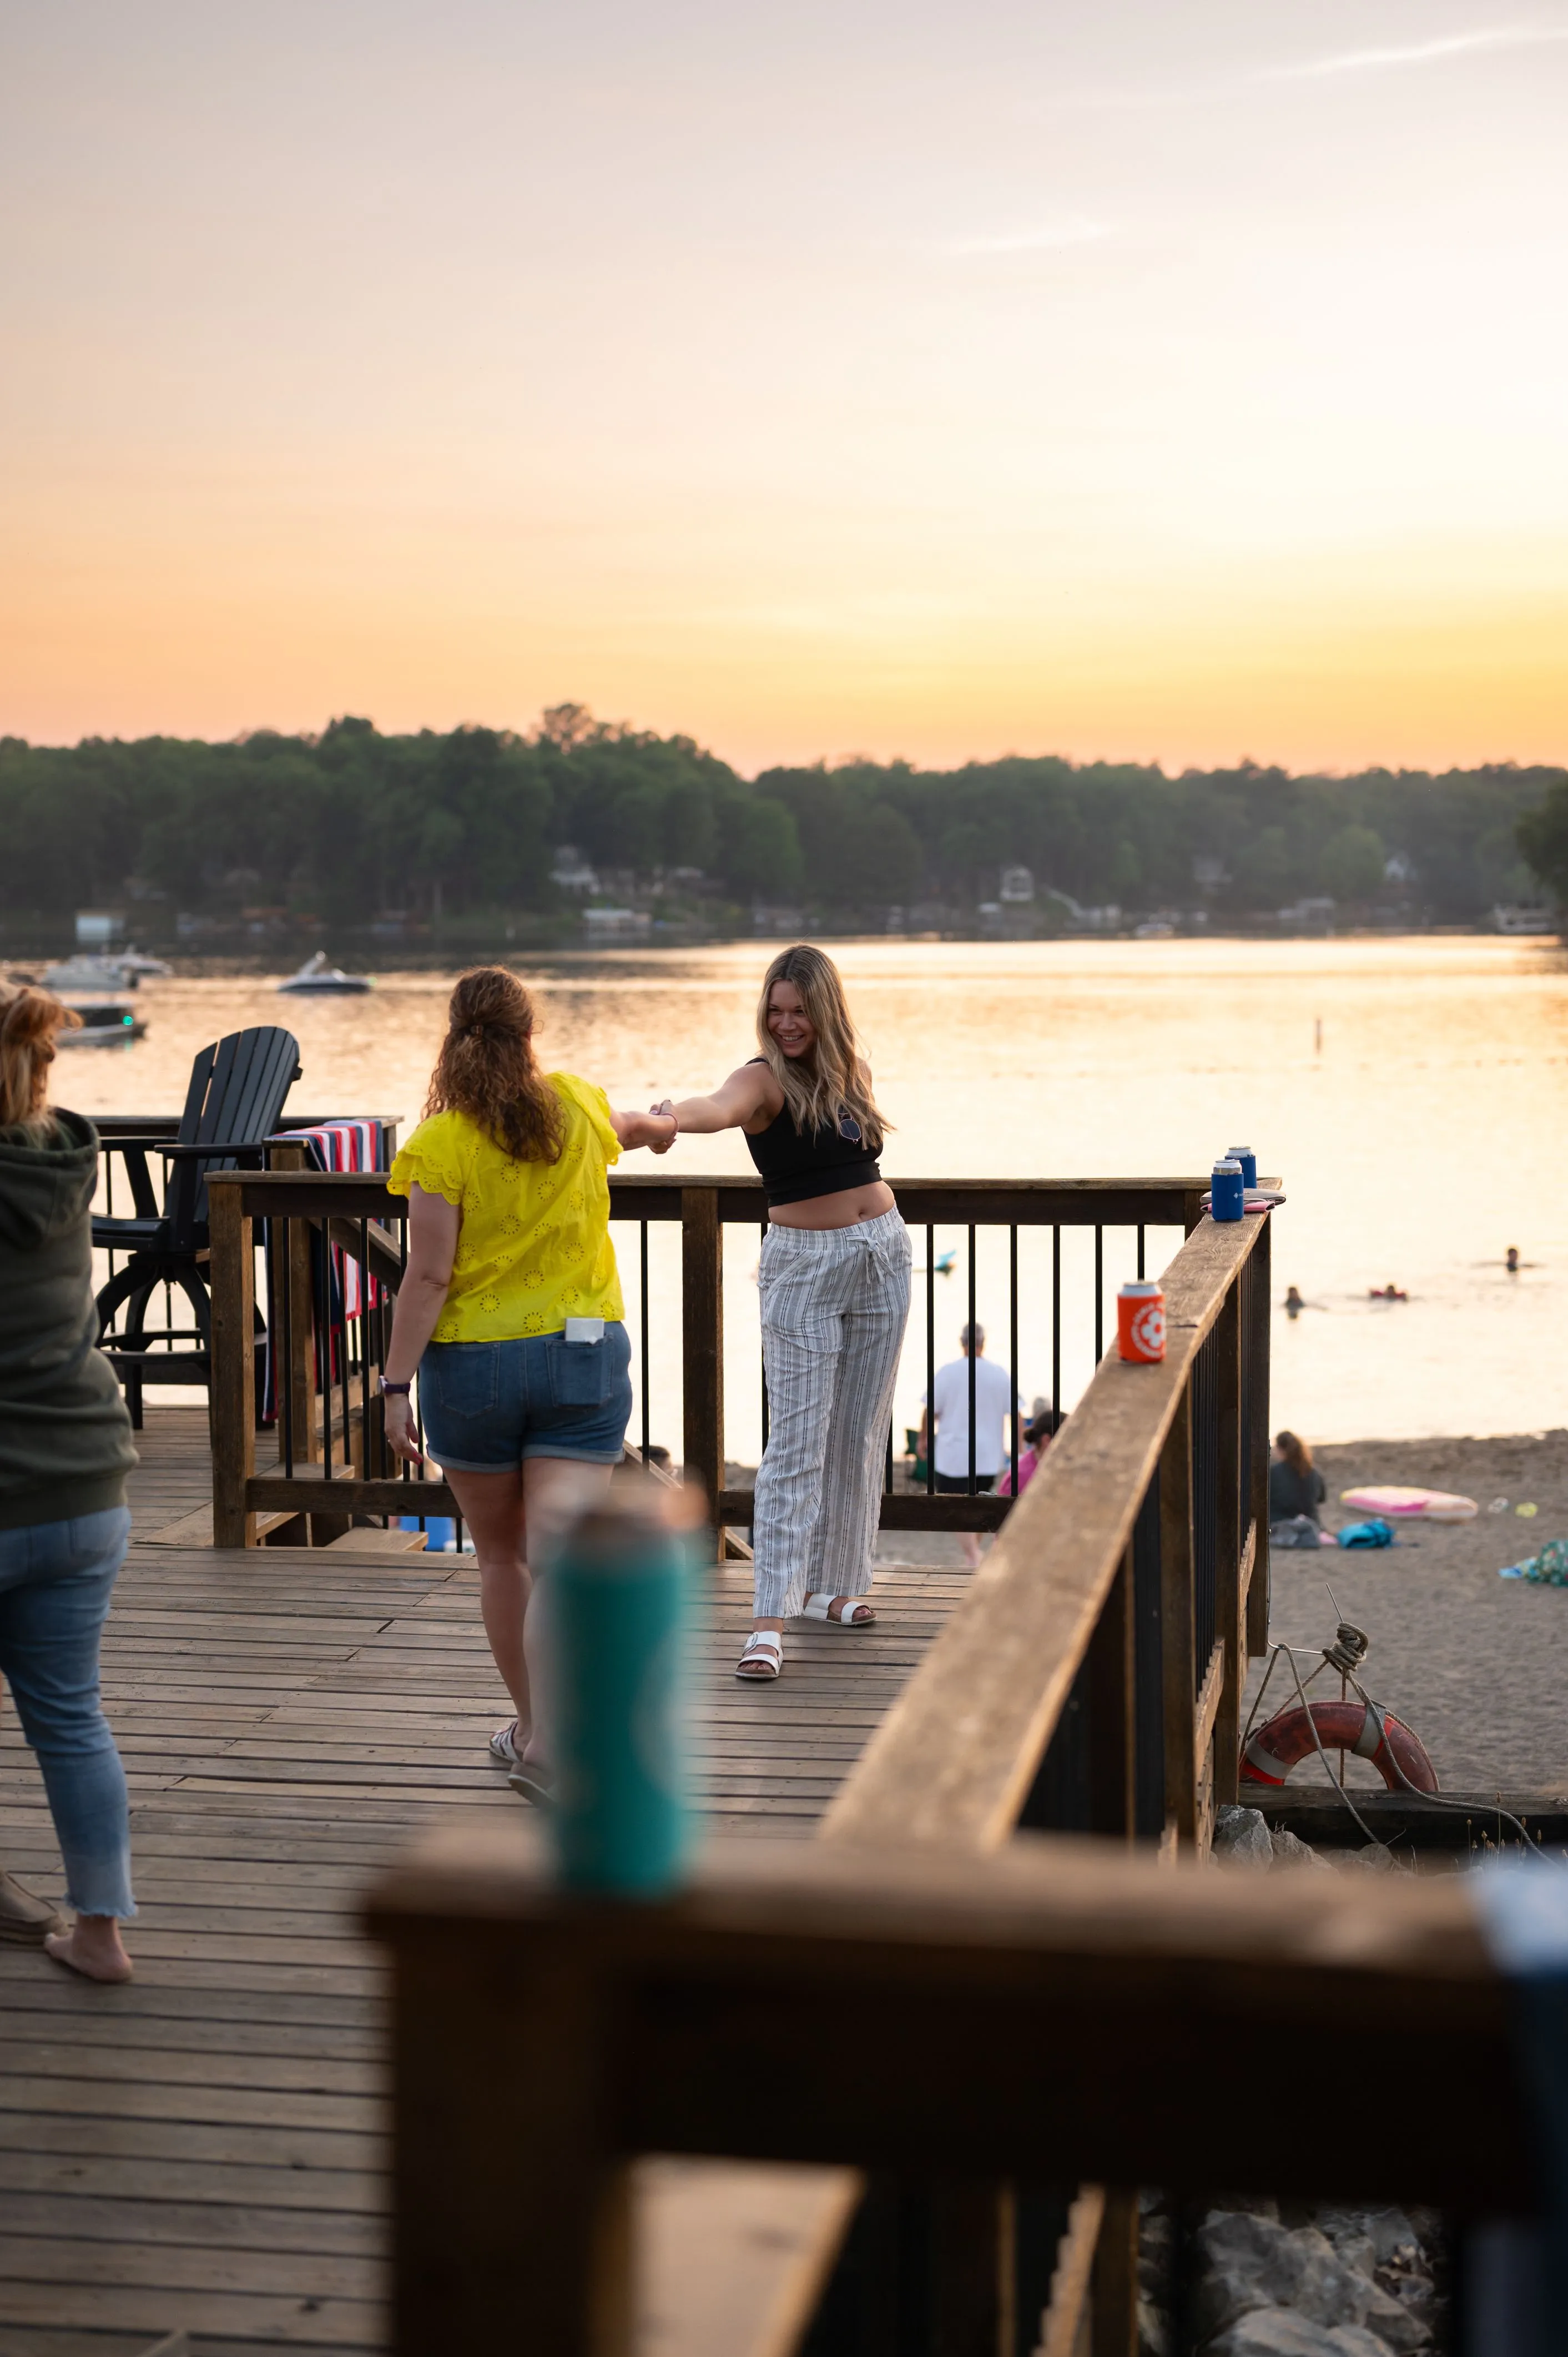 People enjoying a serene lakeside view from a deck during sunset.